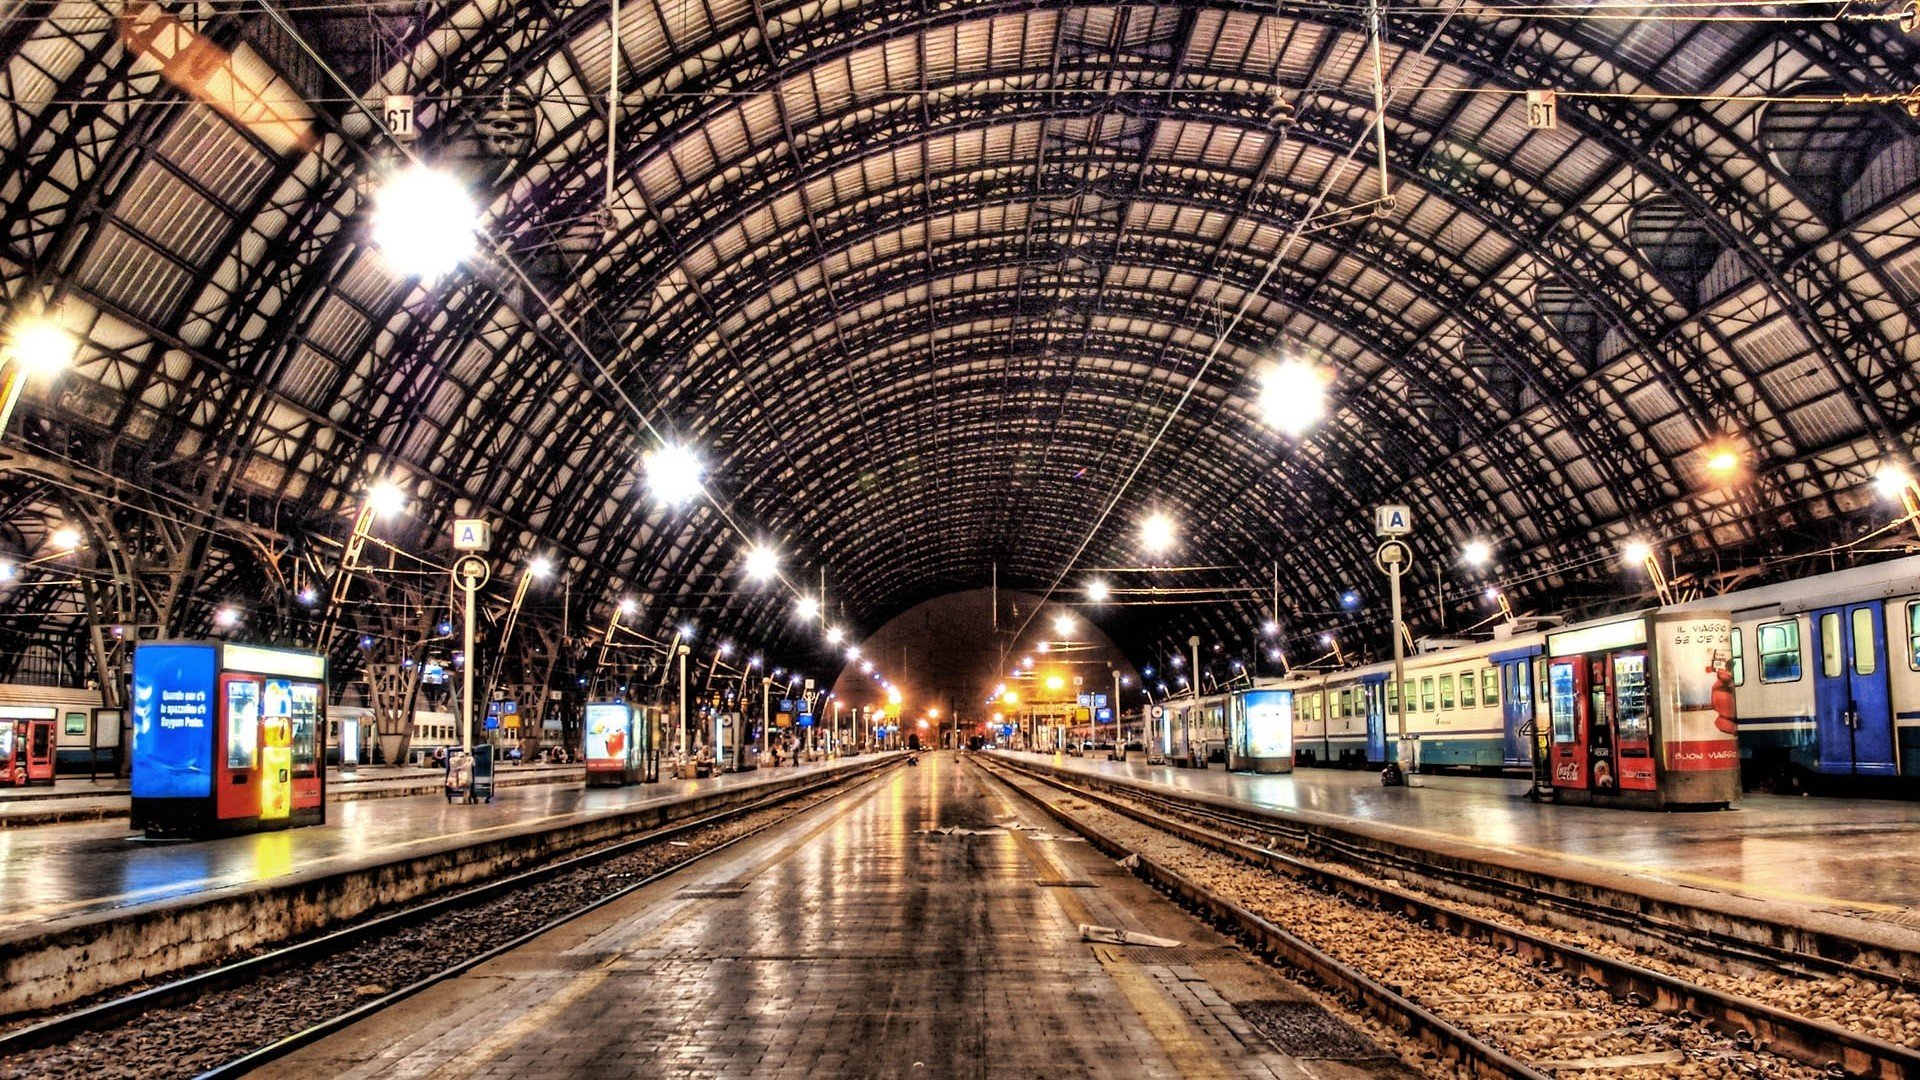 cityscapes, Architecture, Trains, Europe, Train, Stations, Cities, Railway, Station Wallpaper